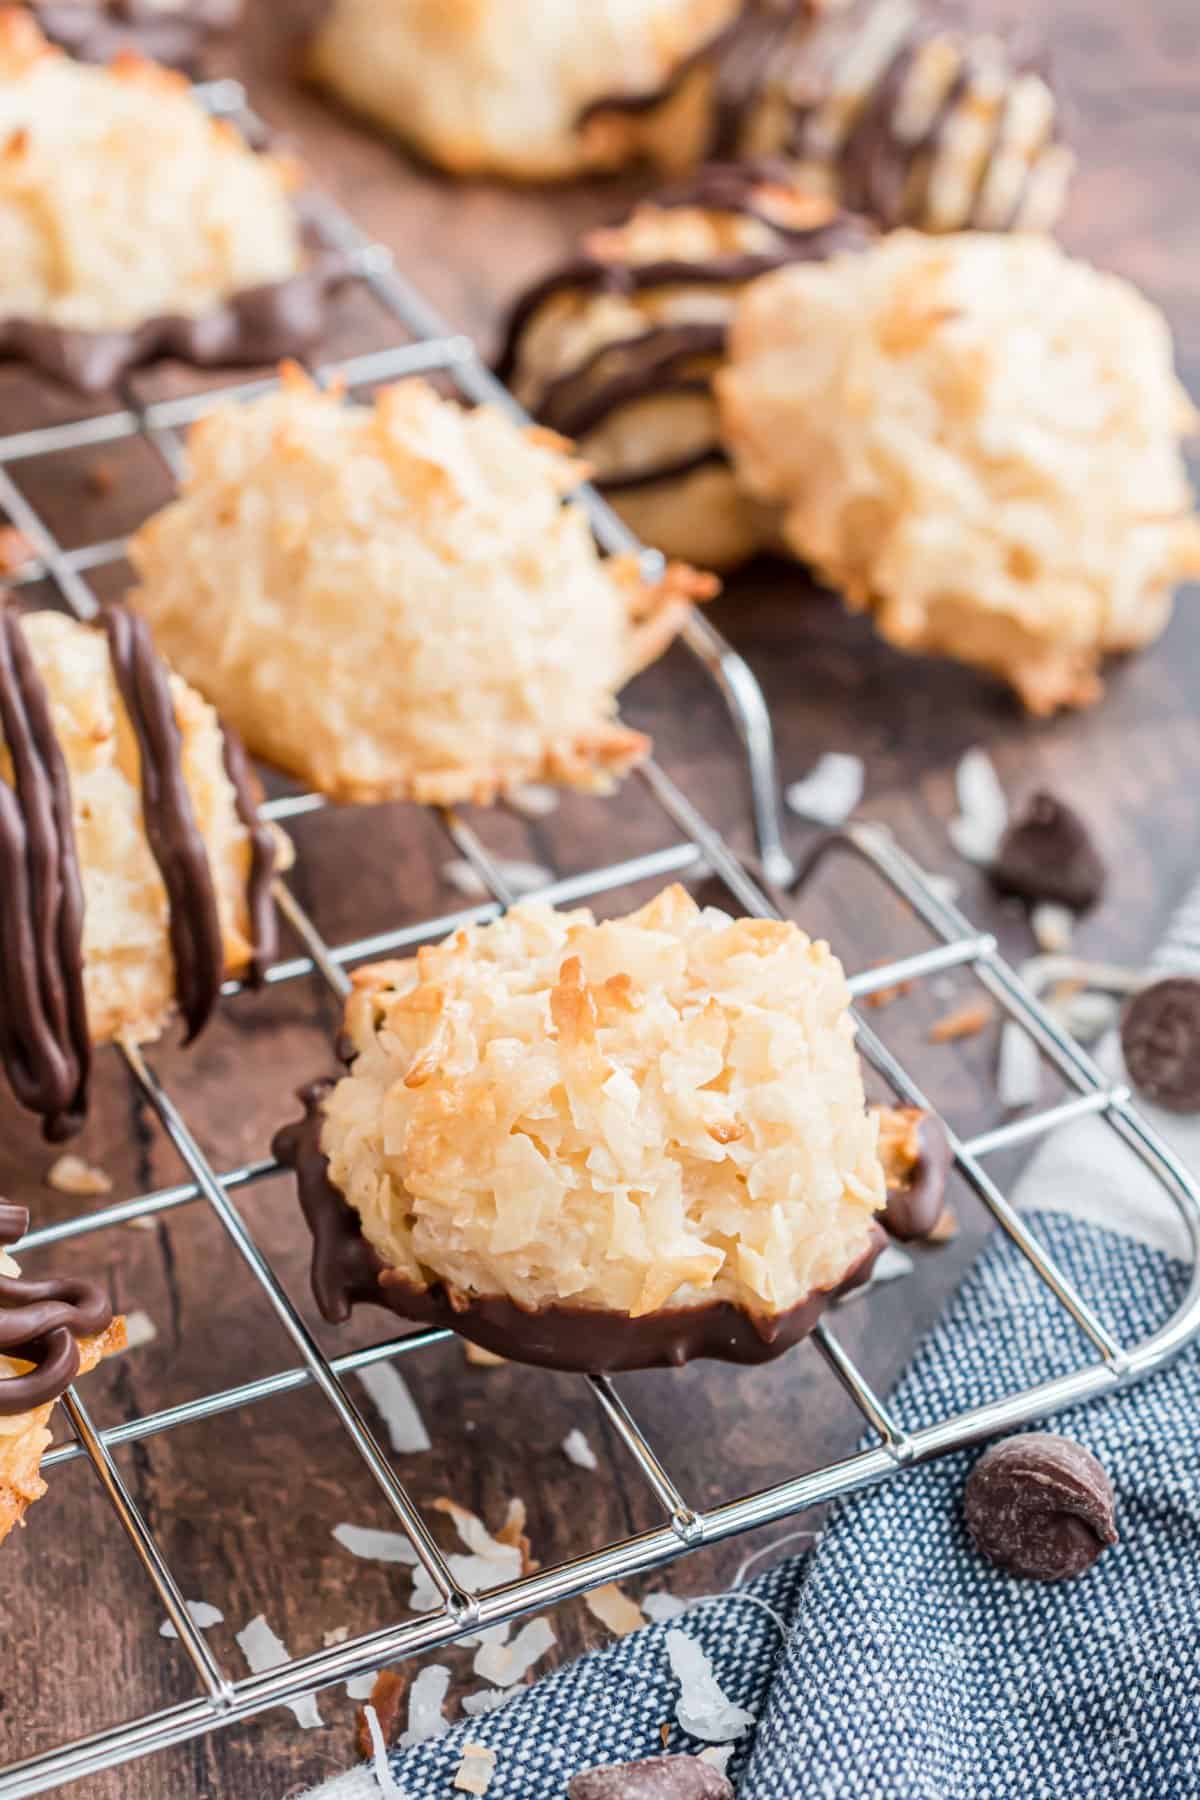 Coconut macaroons on a wire cooling rack, some dipped in chocolate.